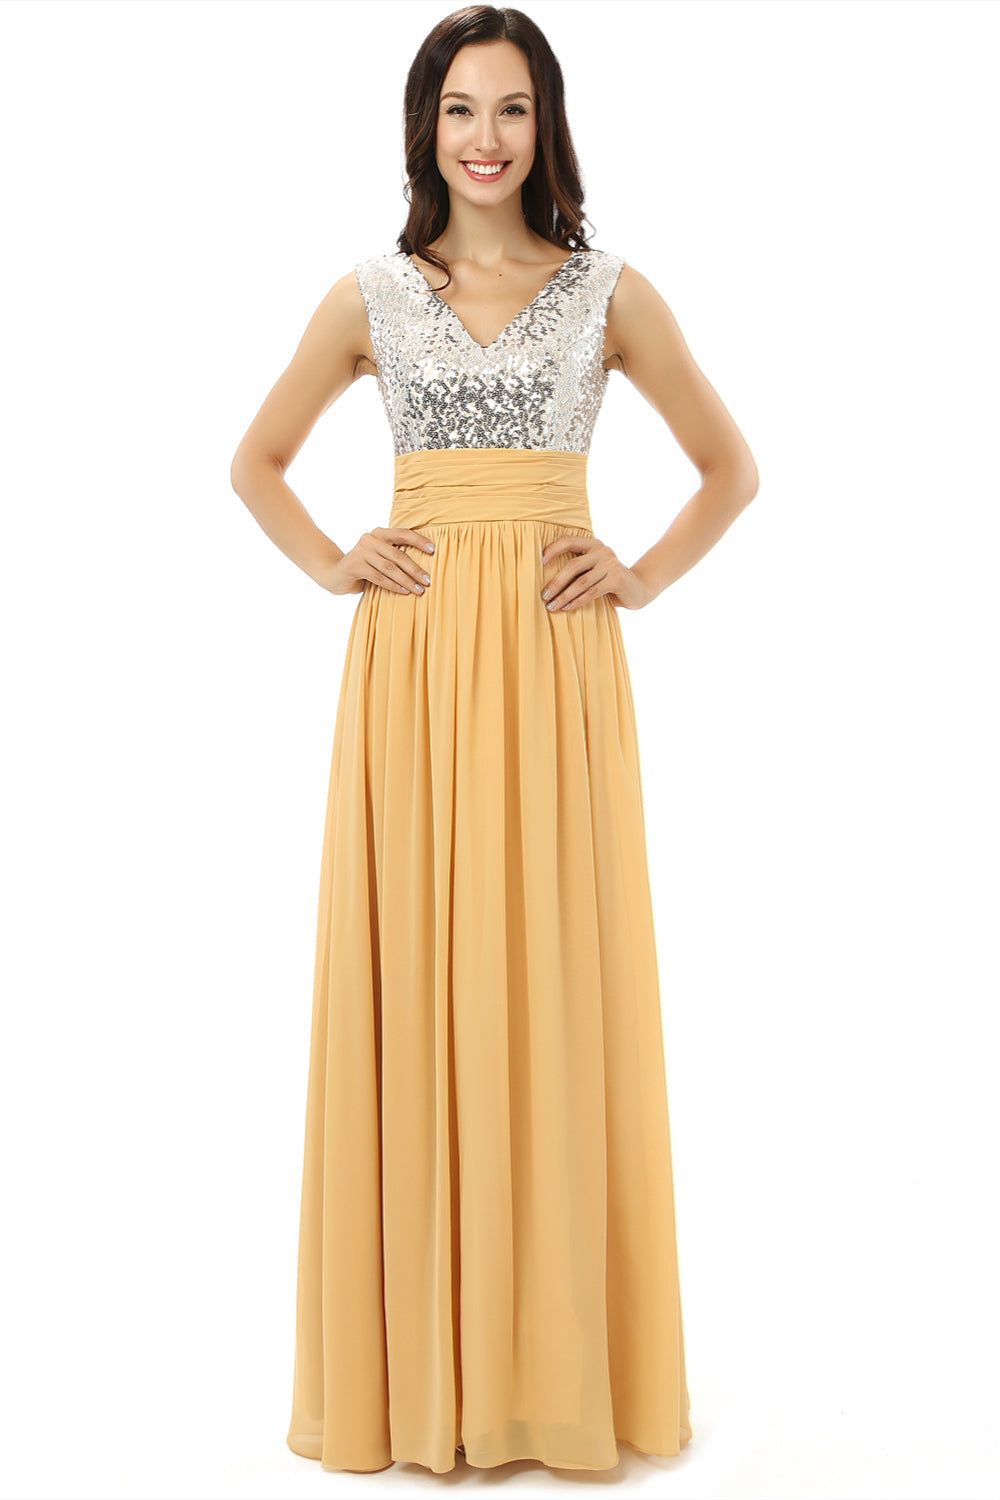 Party Dress Styles, Yellow Chiffon Silver Sequins V-neck Backless Bridesmaid Dresses